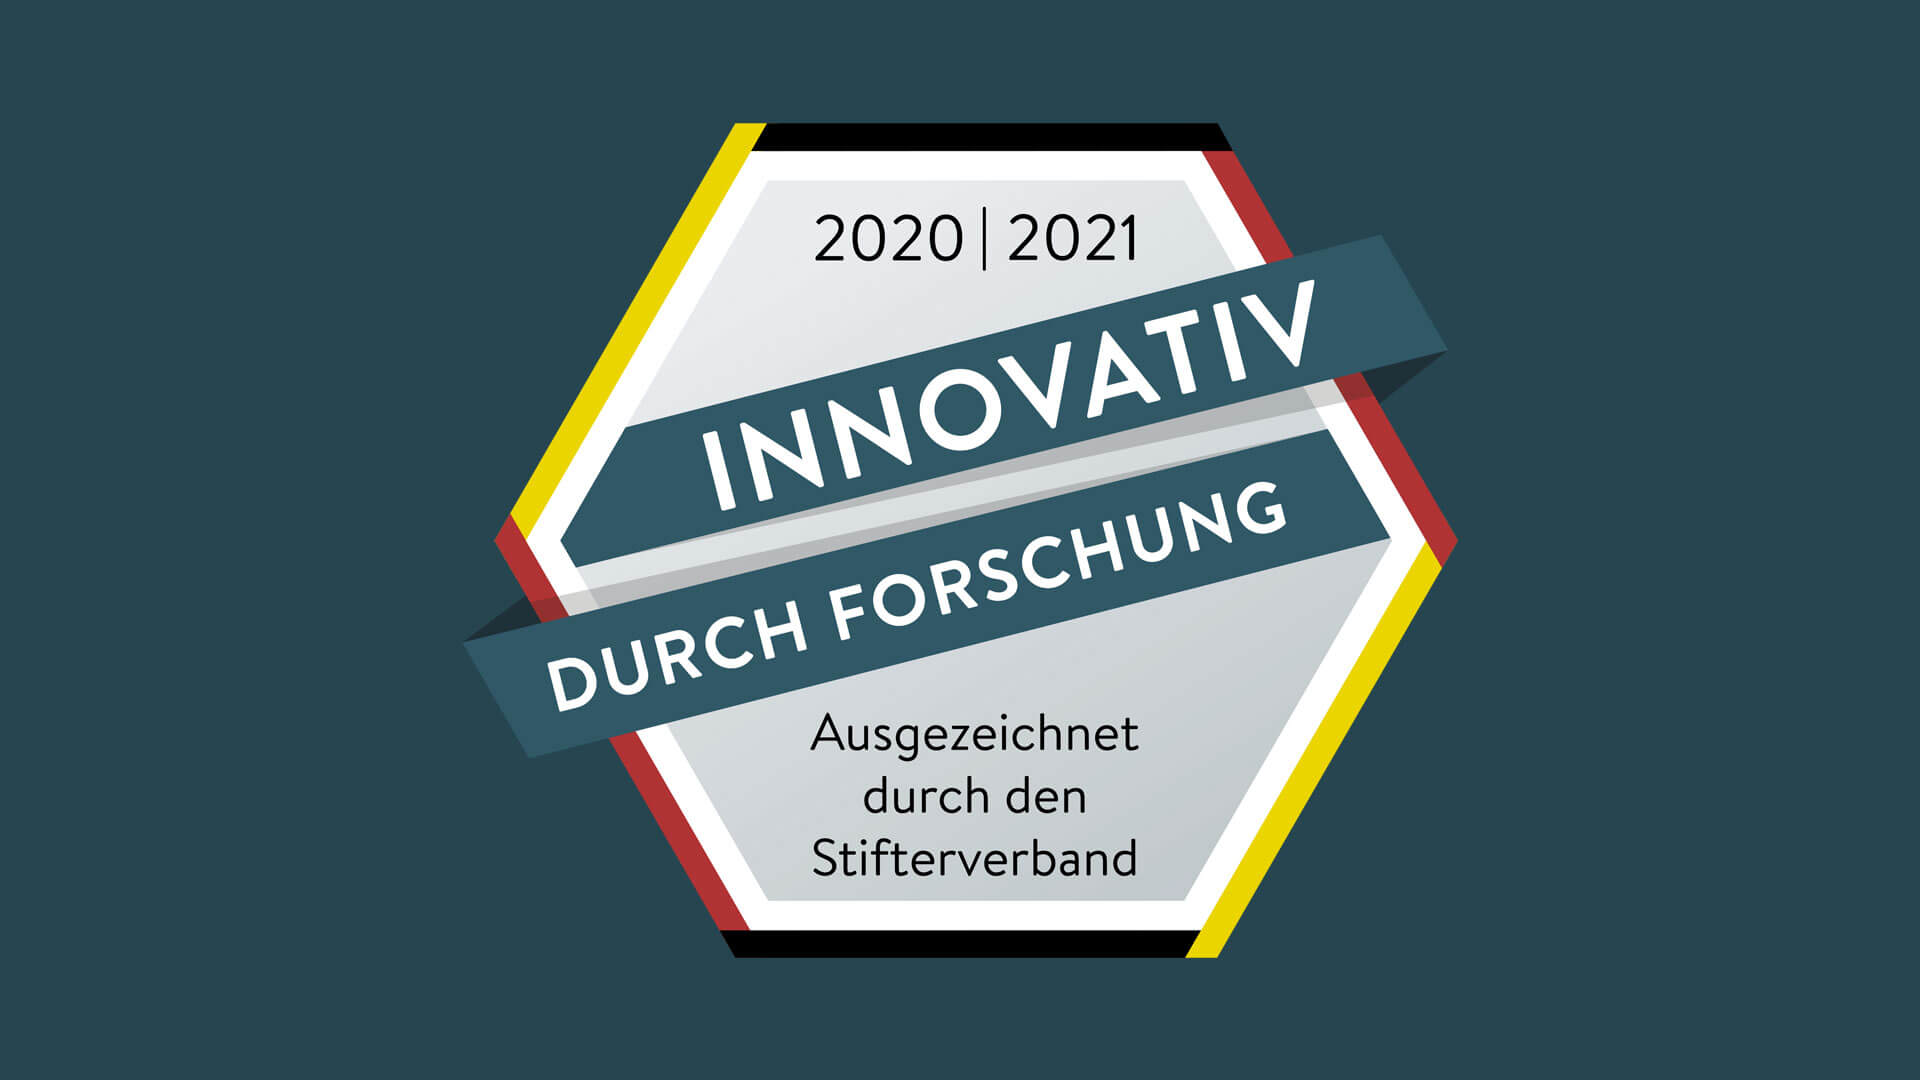 Sunrise Medical Gmbh receives seal of approval 'Innovativ durch Forschung'